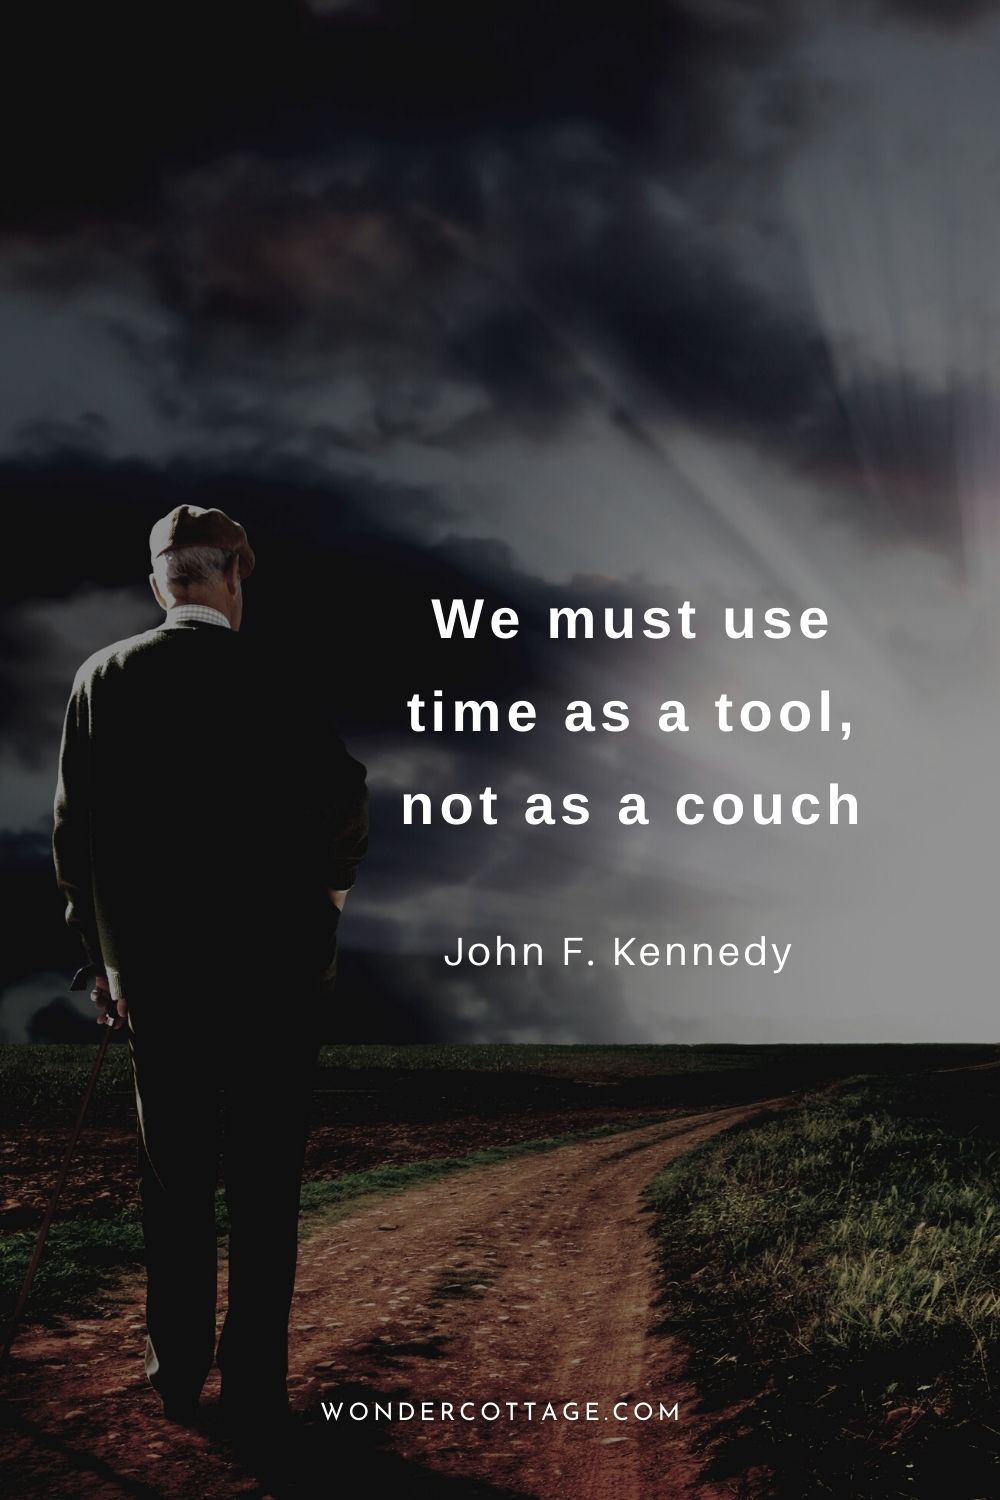 We must use time as a tool, not as a couch.  John F. Kennedy